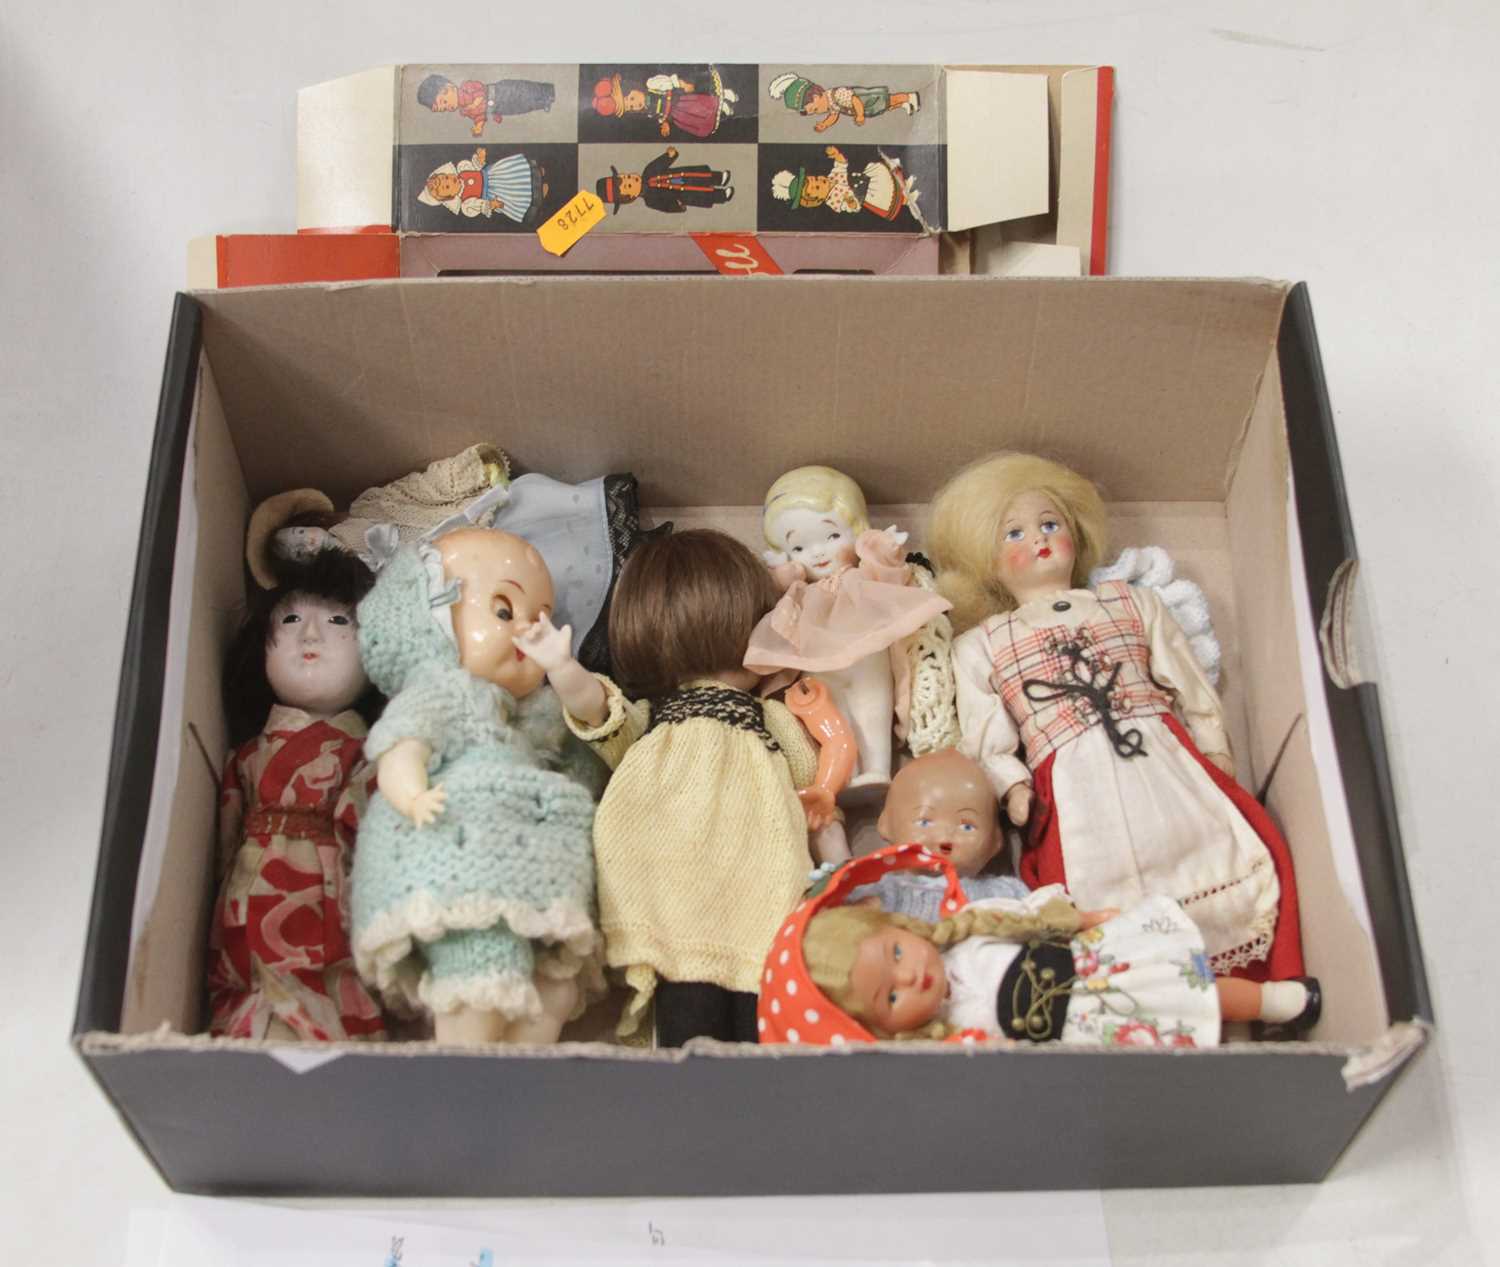 A mid 20th century Sweetheart dancing doll, with original packaging; together with various other